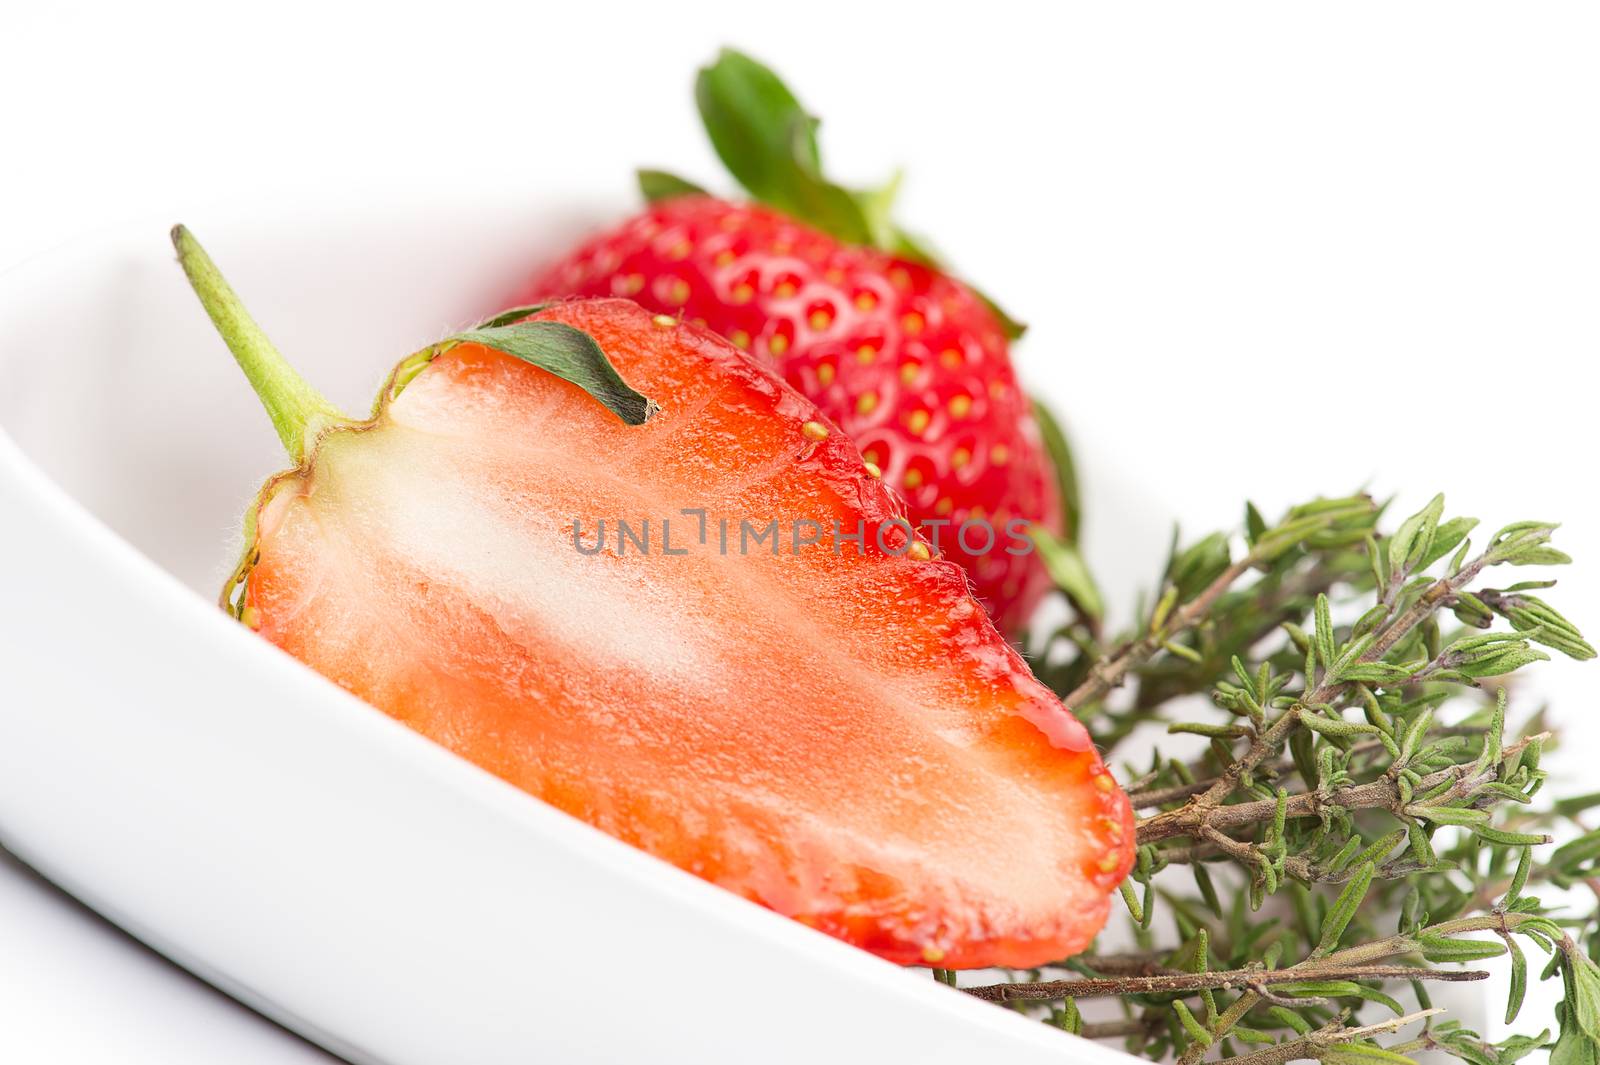 Halved fresh juicy ripe red strawberry showing the structure of the flesh or pulp in a white bowl with a sprig of fresh rosemary to be used as an aromatic flavoring, seasoning and cooking ingredient